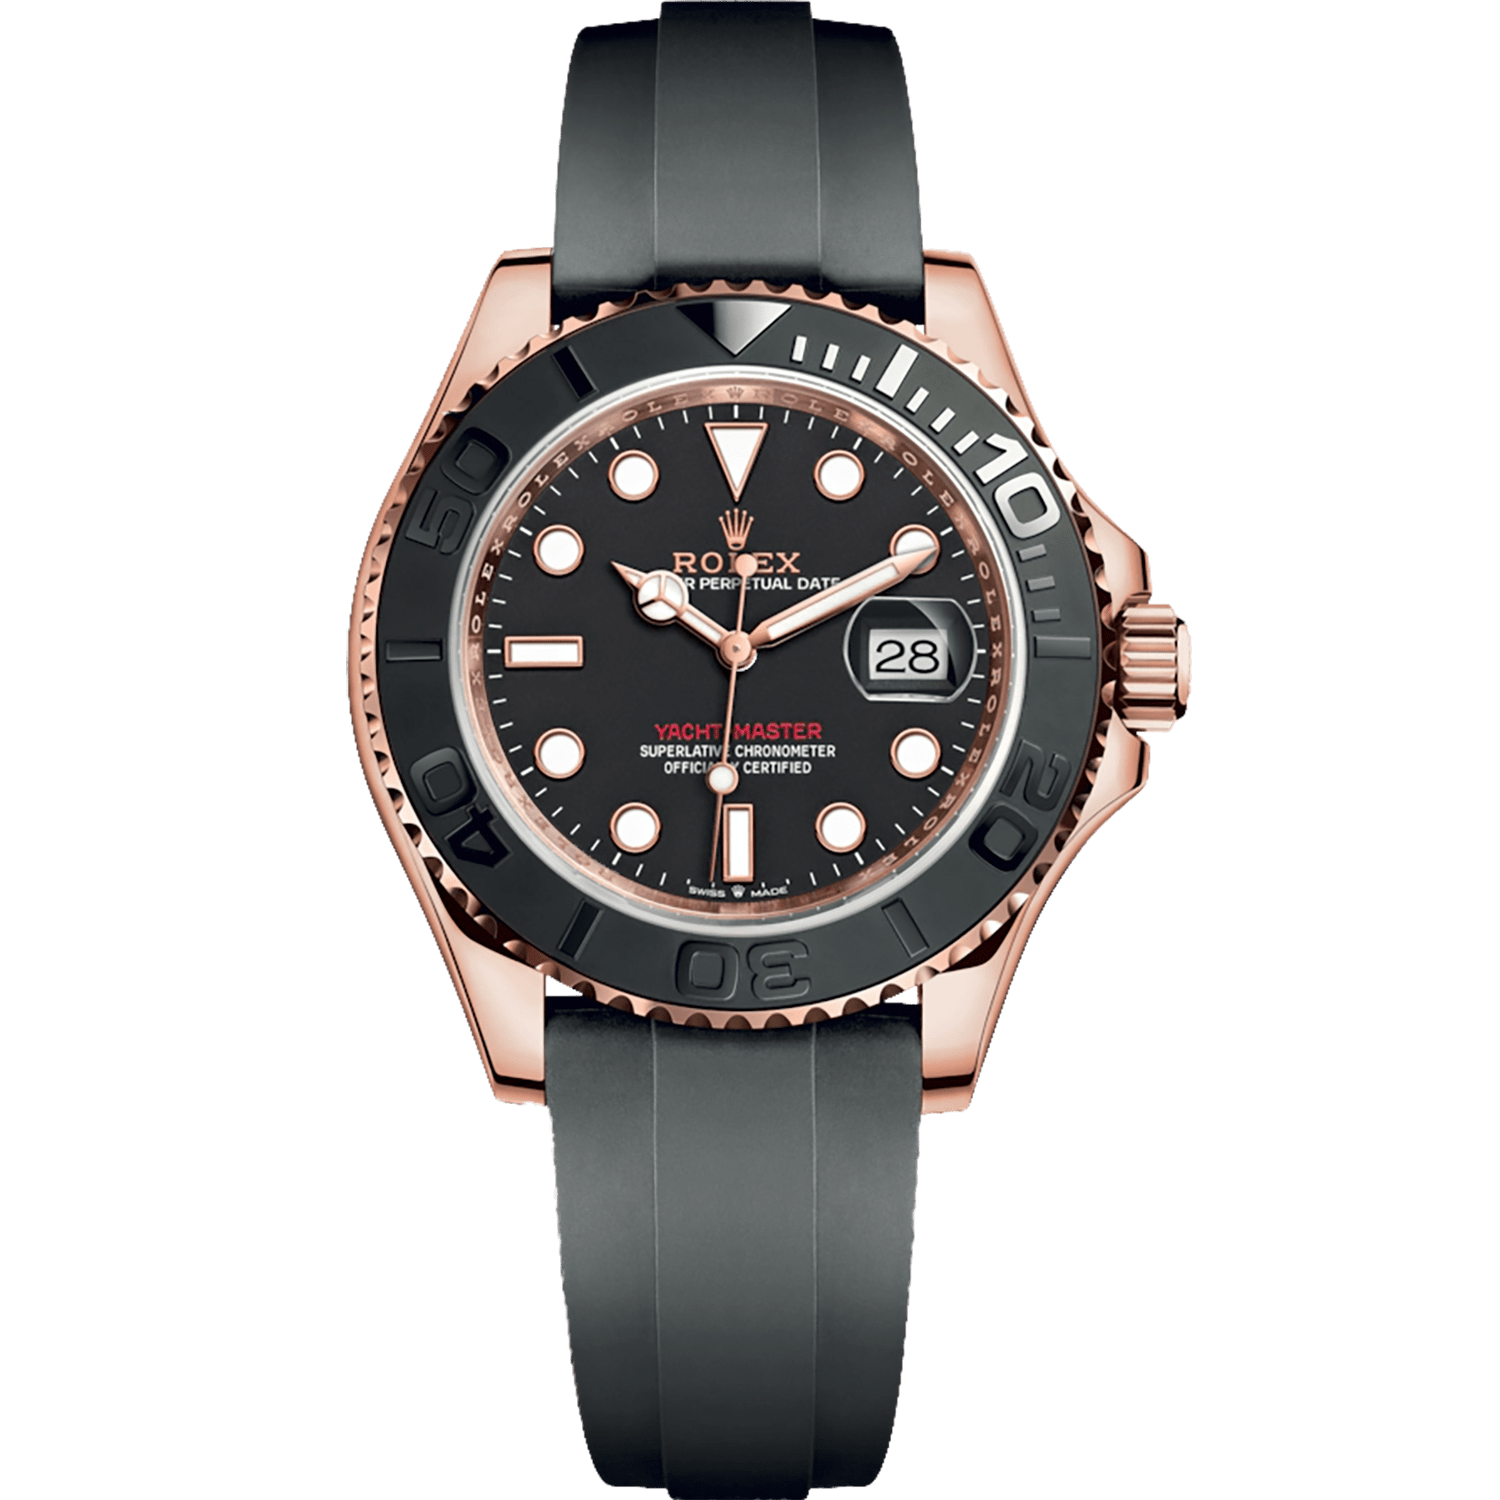 Rolex Oyster Perpetual Date Yacht-Master Noir (126655-0002)